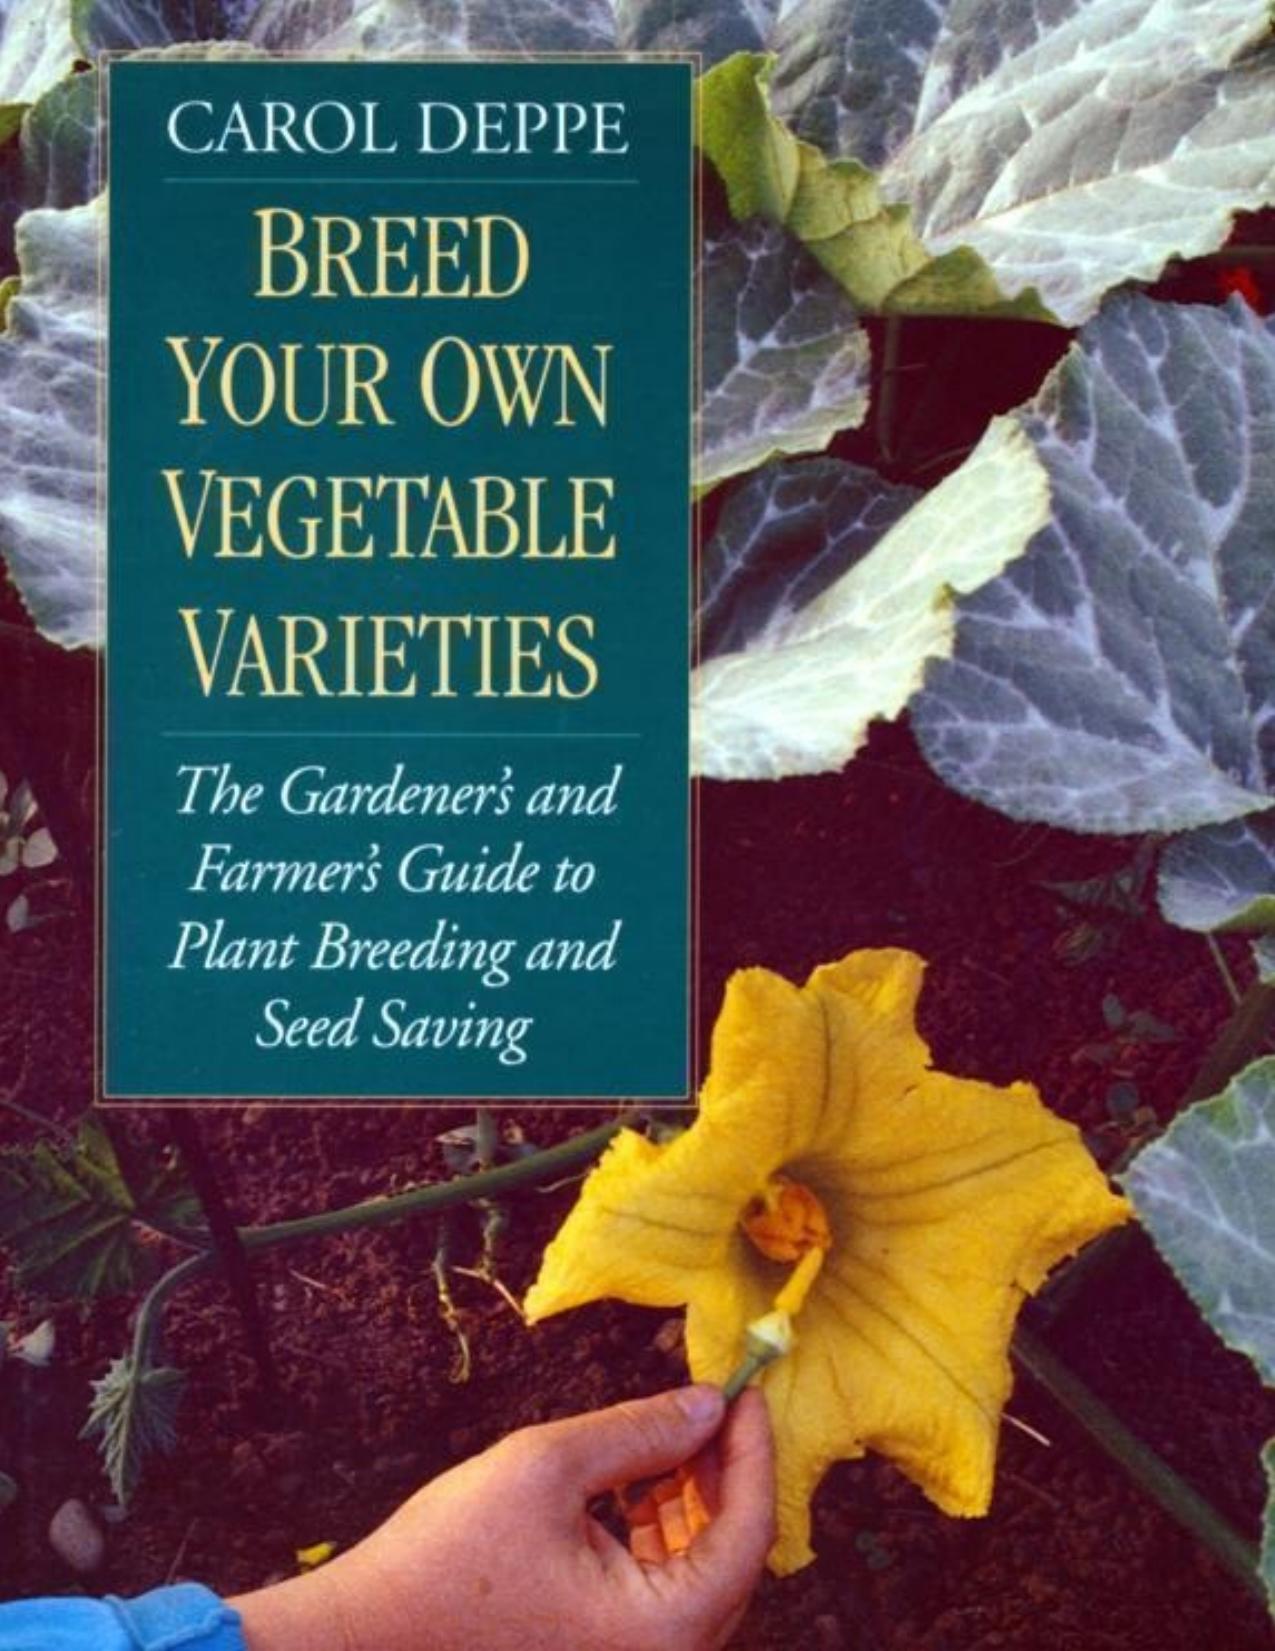 Breed Your Own Vegetable Varieties: The Gardener's \& Farmer's Guide to Plant Breeding \& Seed Saving - PDFDrive.com